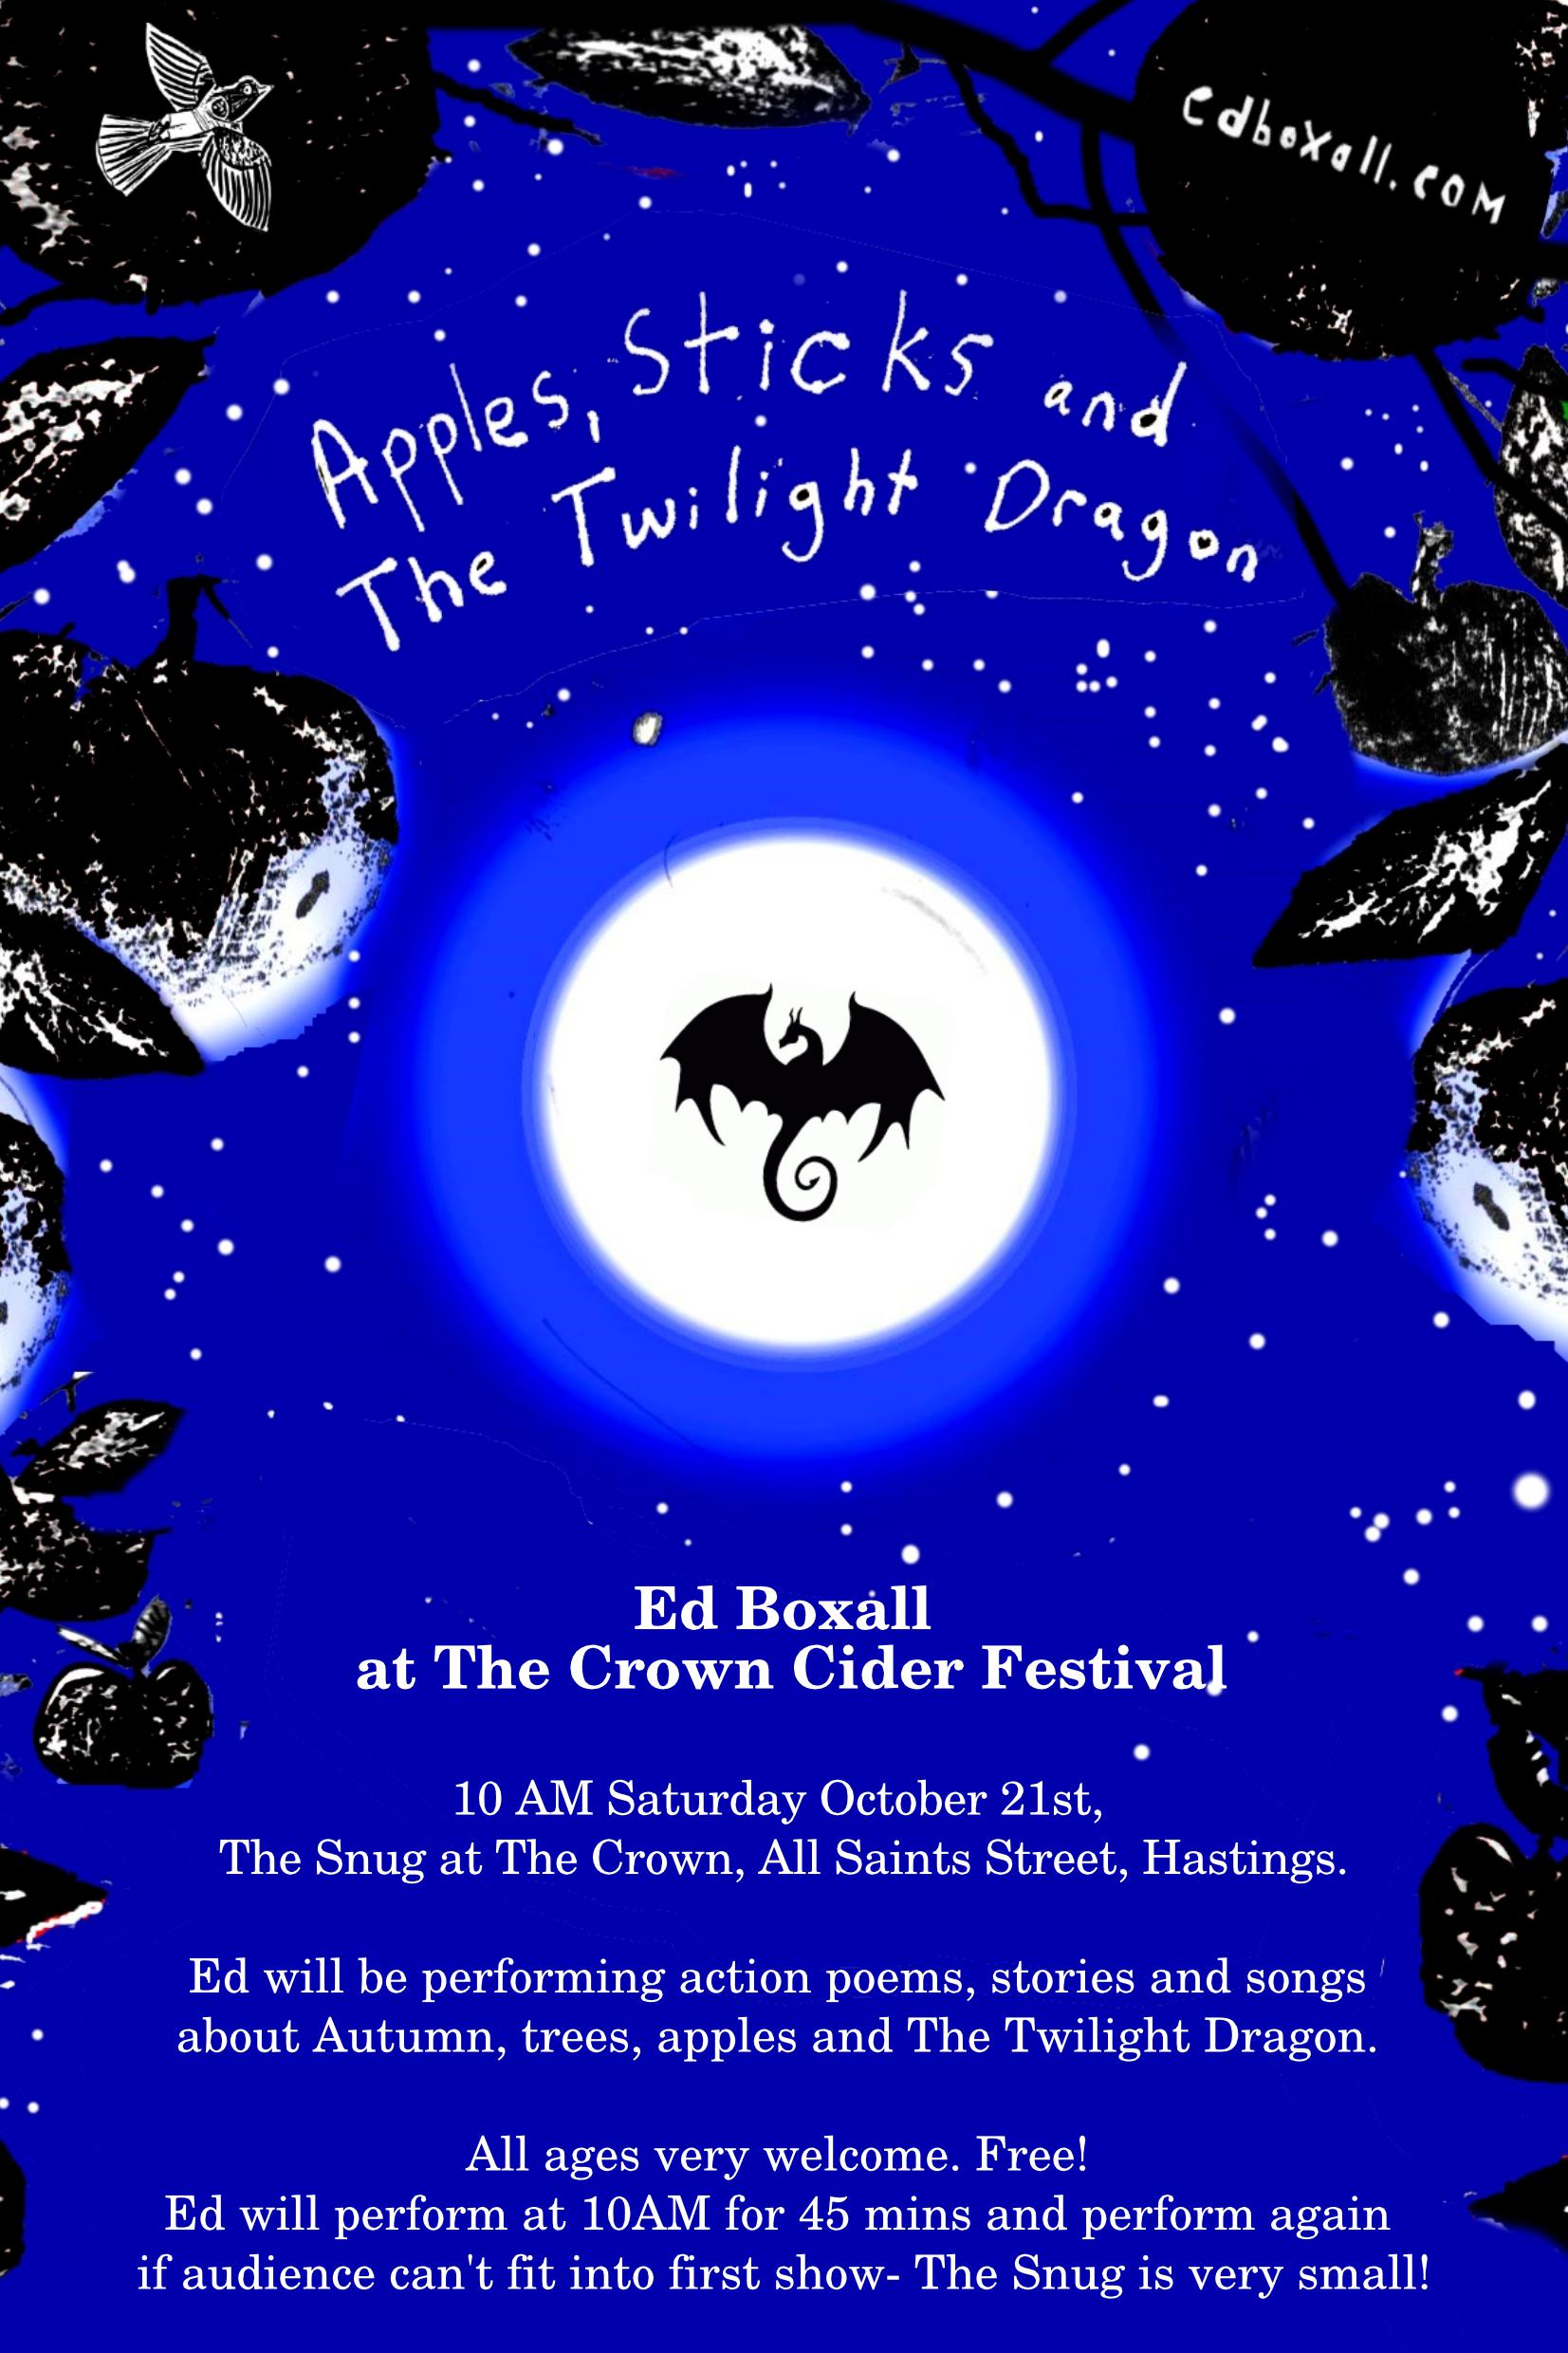 Poster for Ed Boxall: Apples, Sticks and The Twilight Dragon